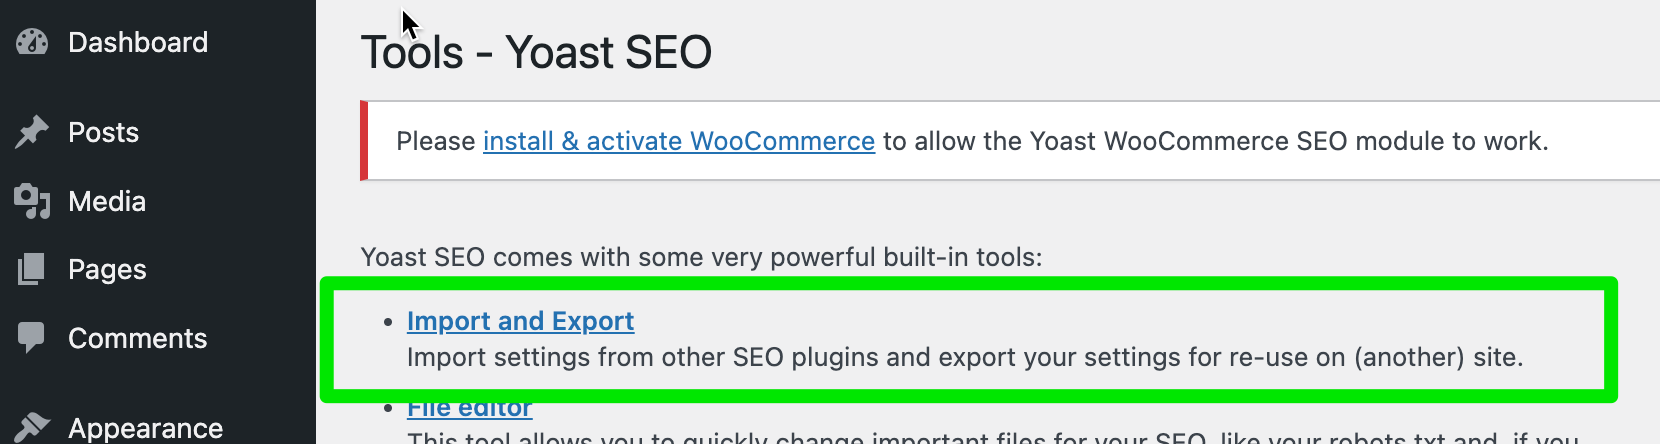 The tools menu of Yoast SEO, with a green box around the import and export settings